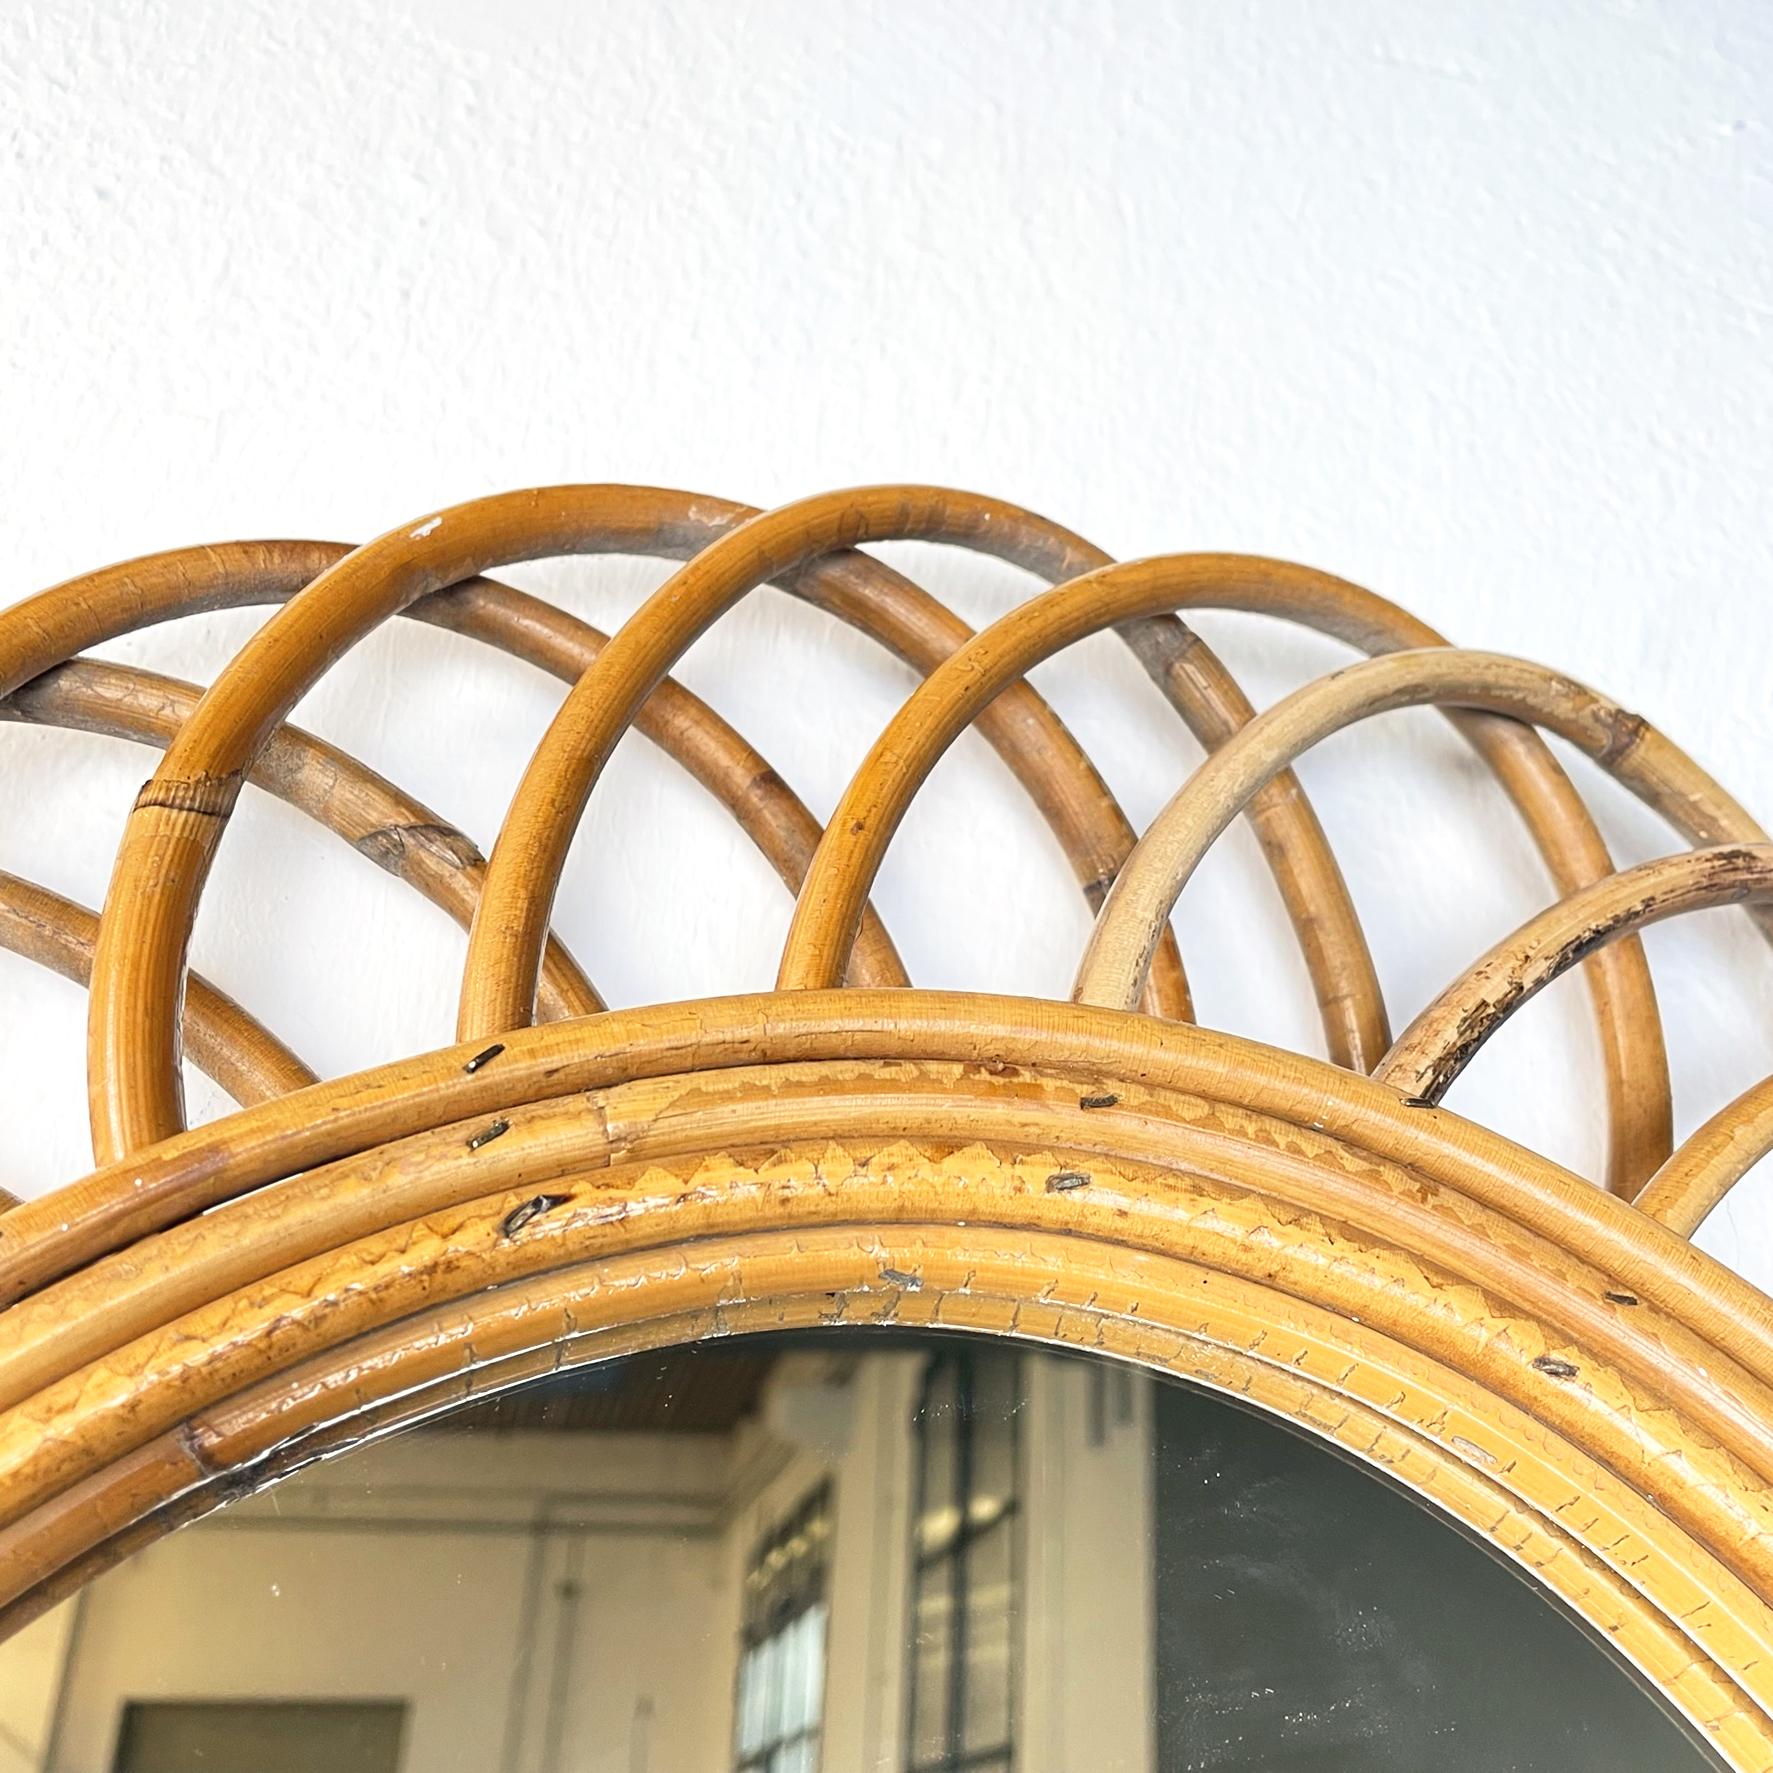 Mid-20th Century Italian Mid-Century Modern Oval-Shaped Wall Mirror in Curved Rattan, 1950s